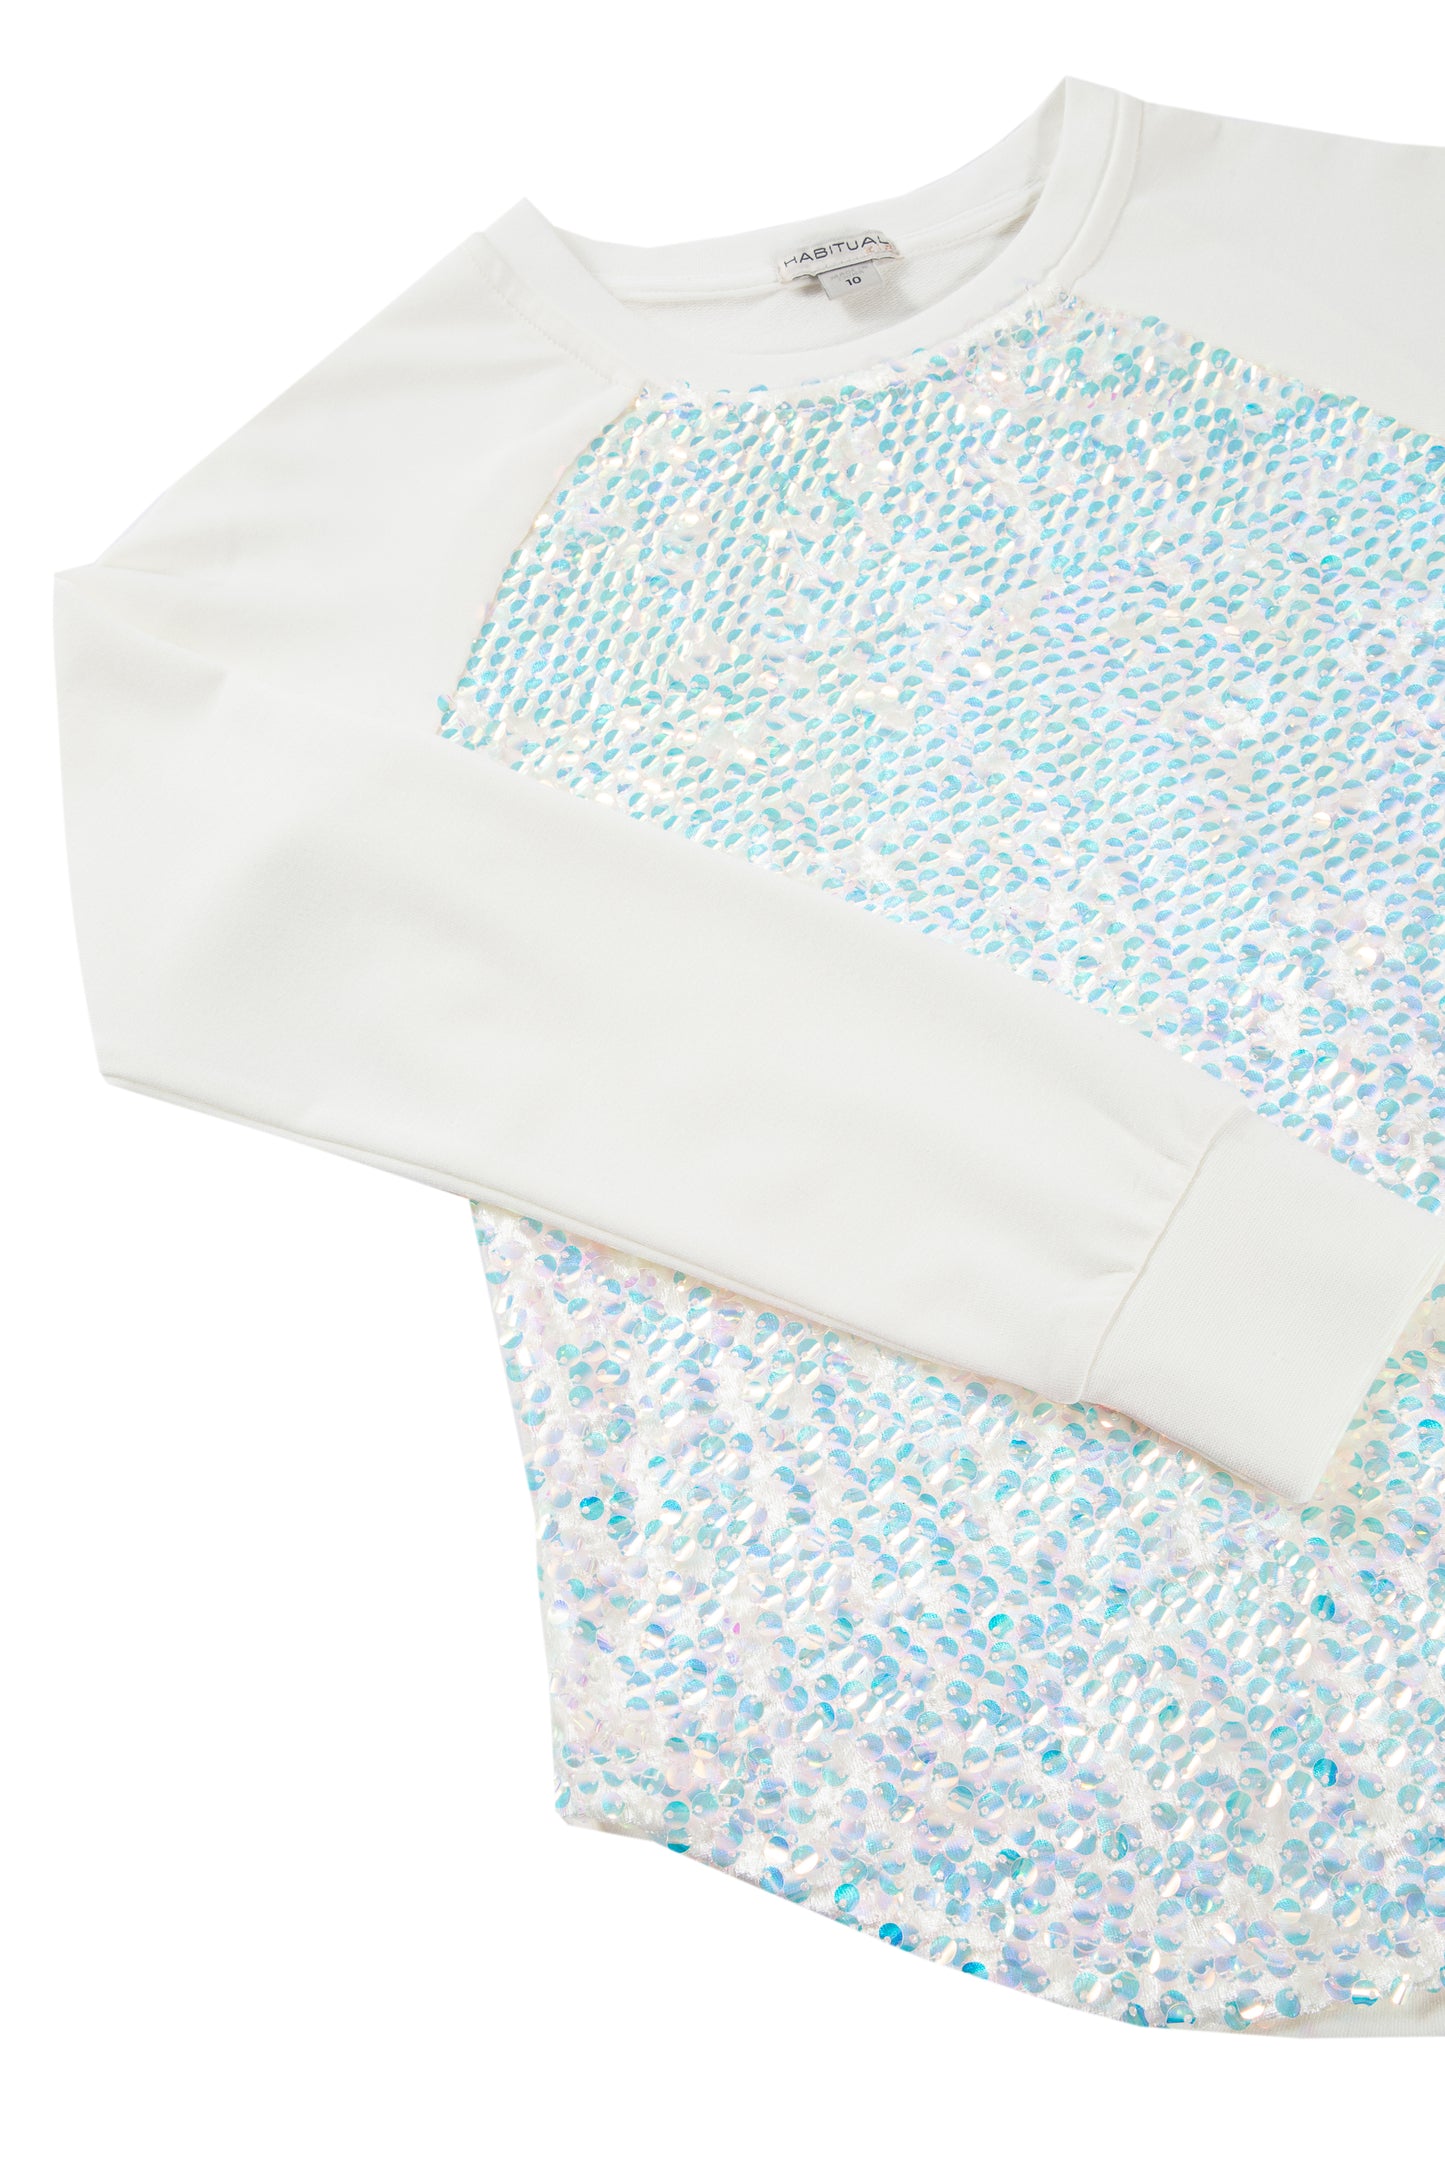 WHITE LONG-SLEEVE TOP WITH IRIDESCENT BLUE SEQUINS